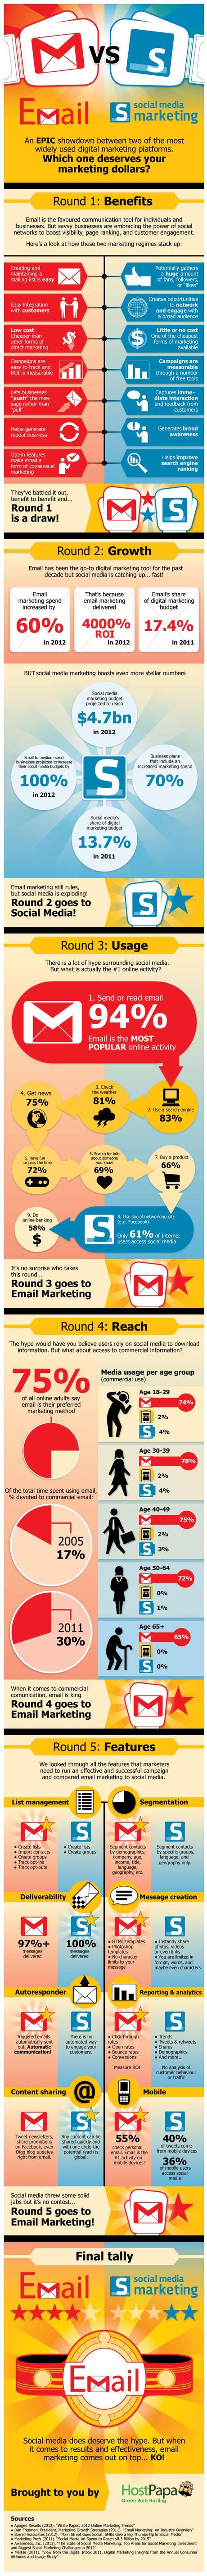 Email Marketing Knocks Out Social Media in 5 Rounds